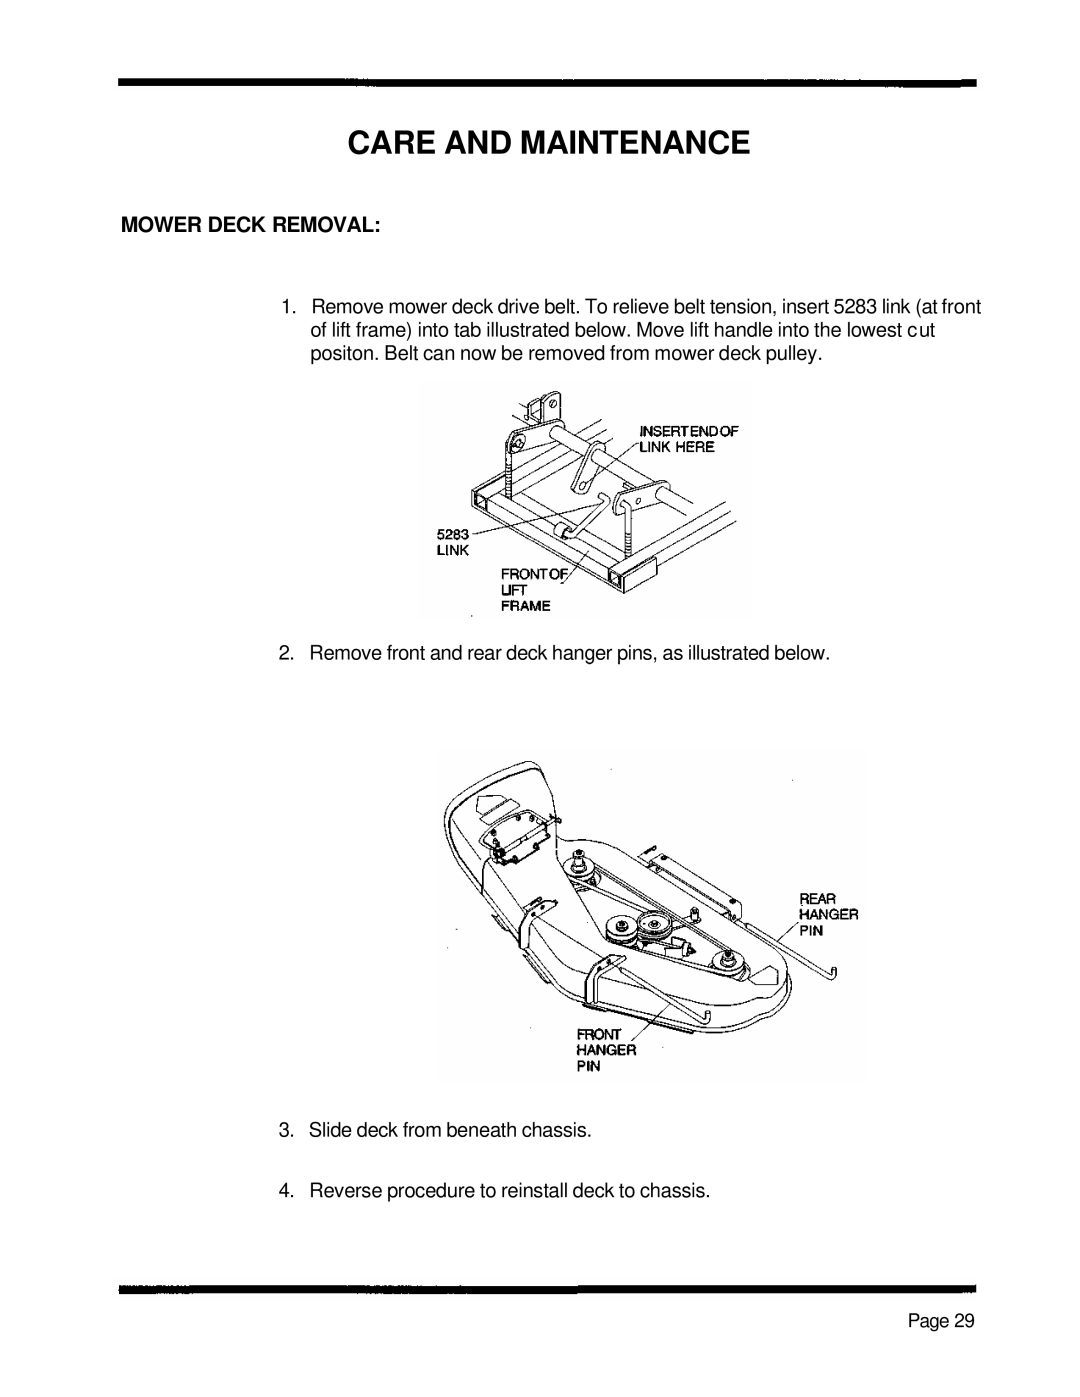 Dixon 5000 Series manual Care And Maintenance, Mower Deck Removal 